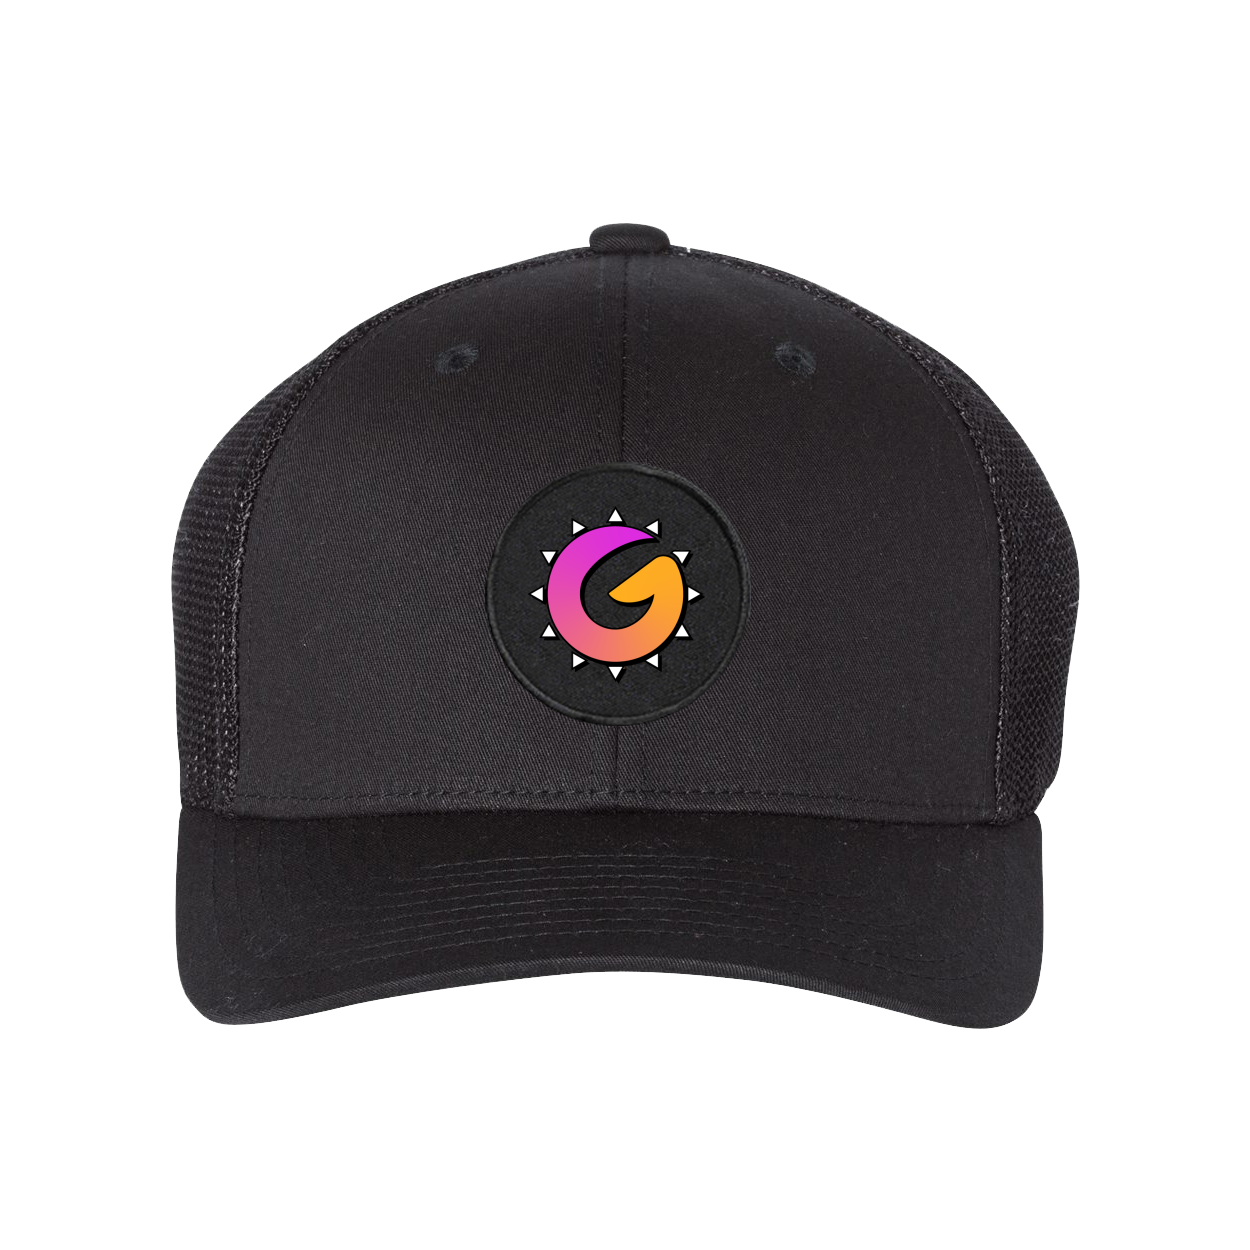 Golden Hour Esports Classic Woven Circle Patch Snapback Trucker Hat Black